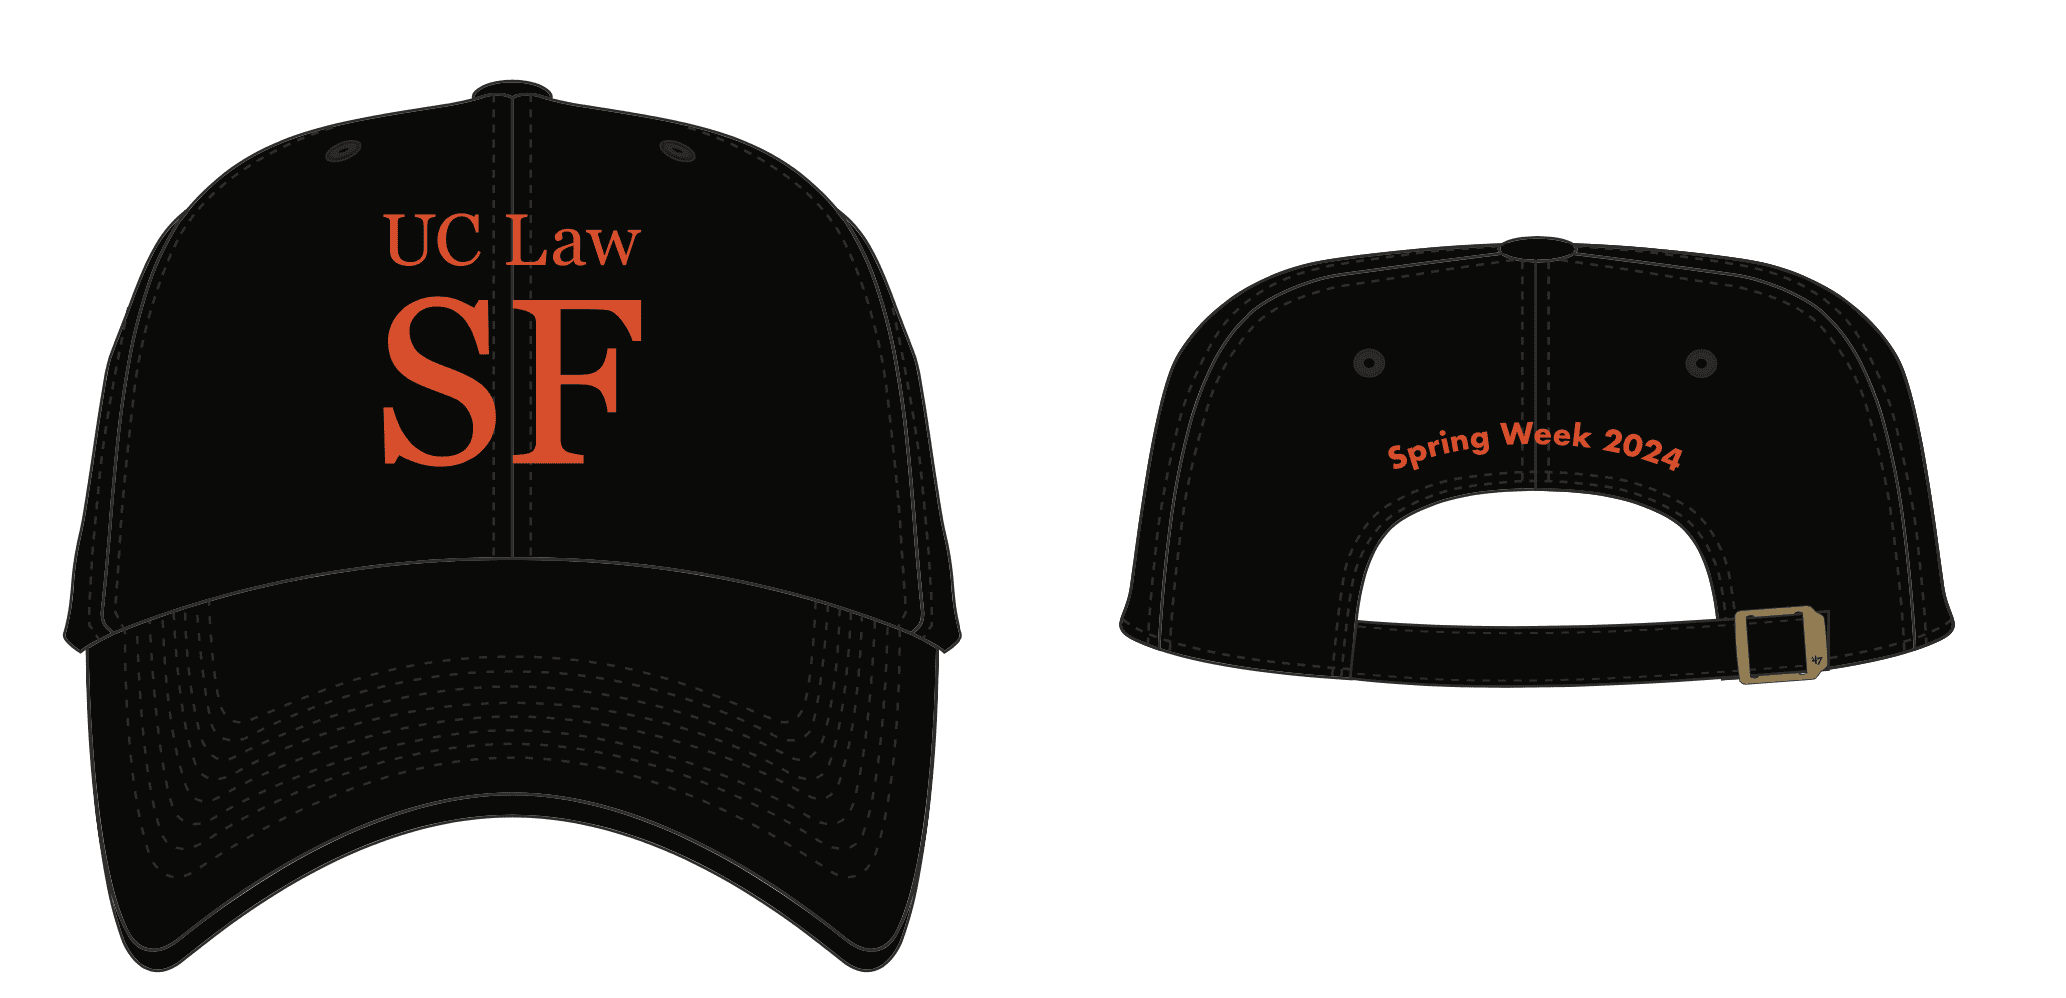 UC Law SF - SF Giants limited edition hat! (First 100 ticket buyers!)